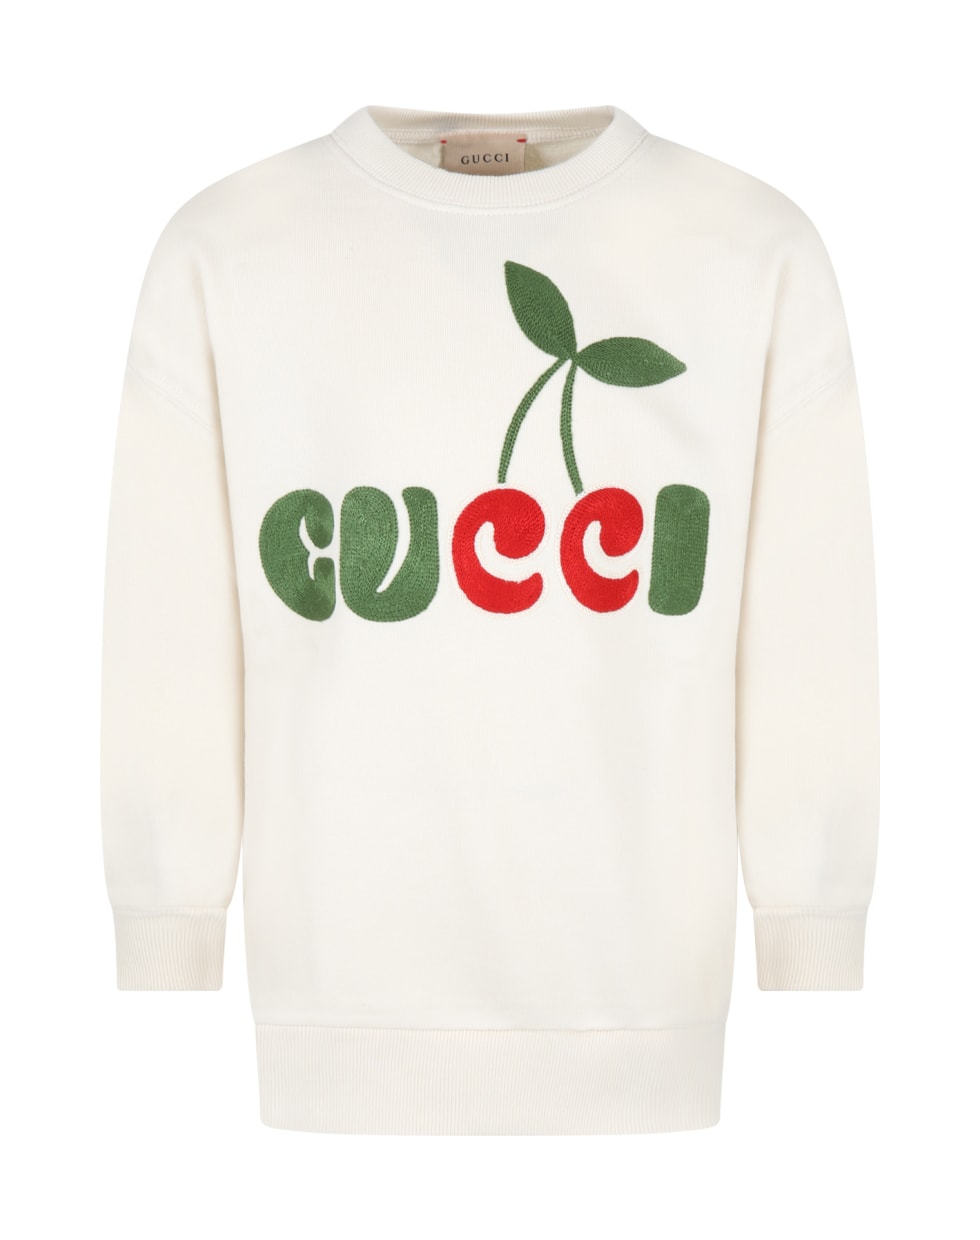 Gucci Ivory Sweatshirt For Kids With Cherry Print - White Multicolor